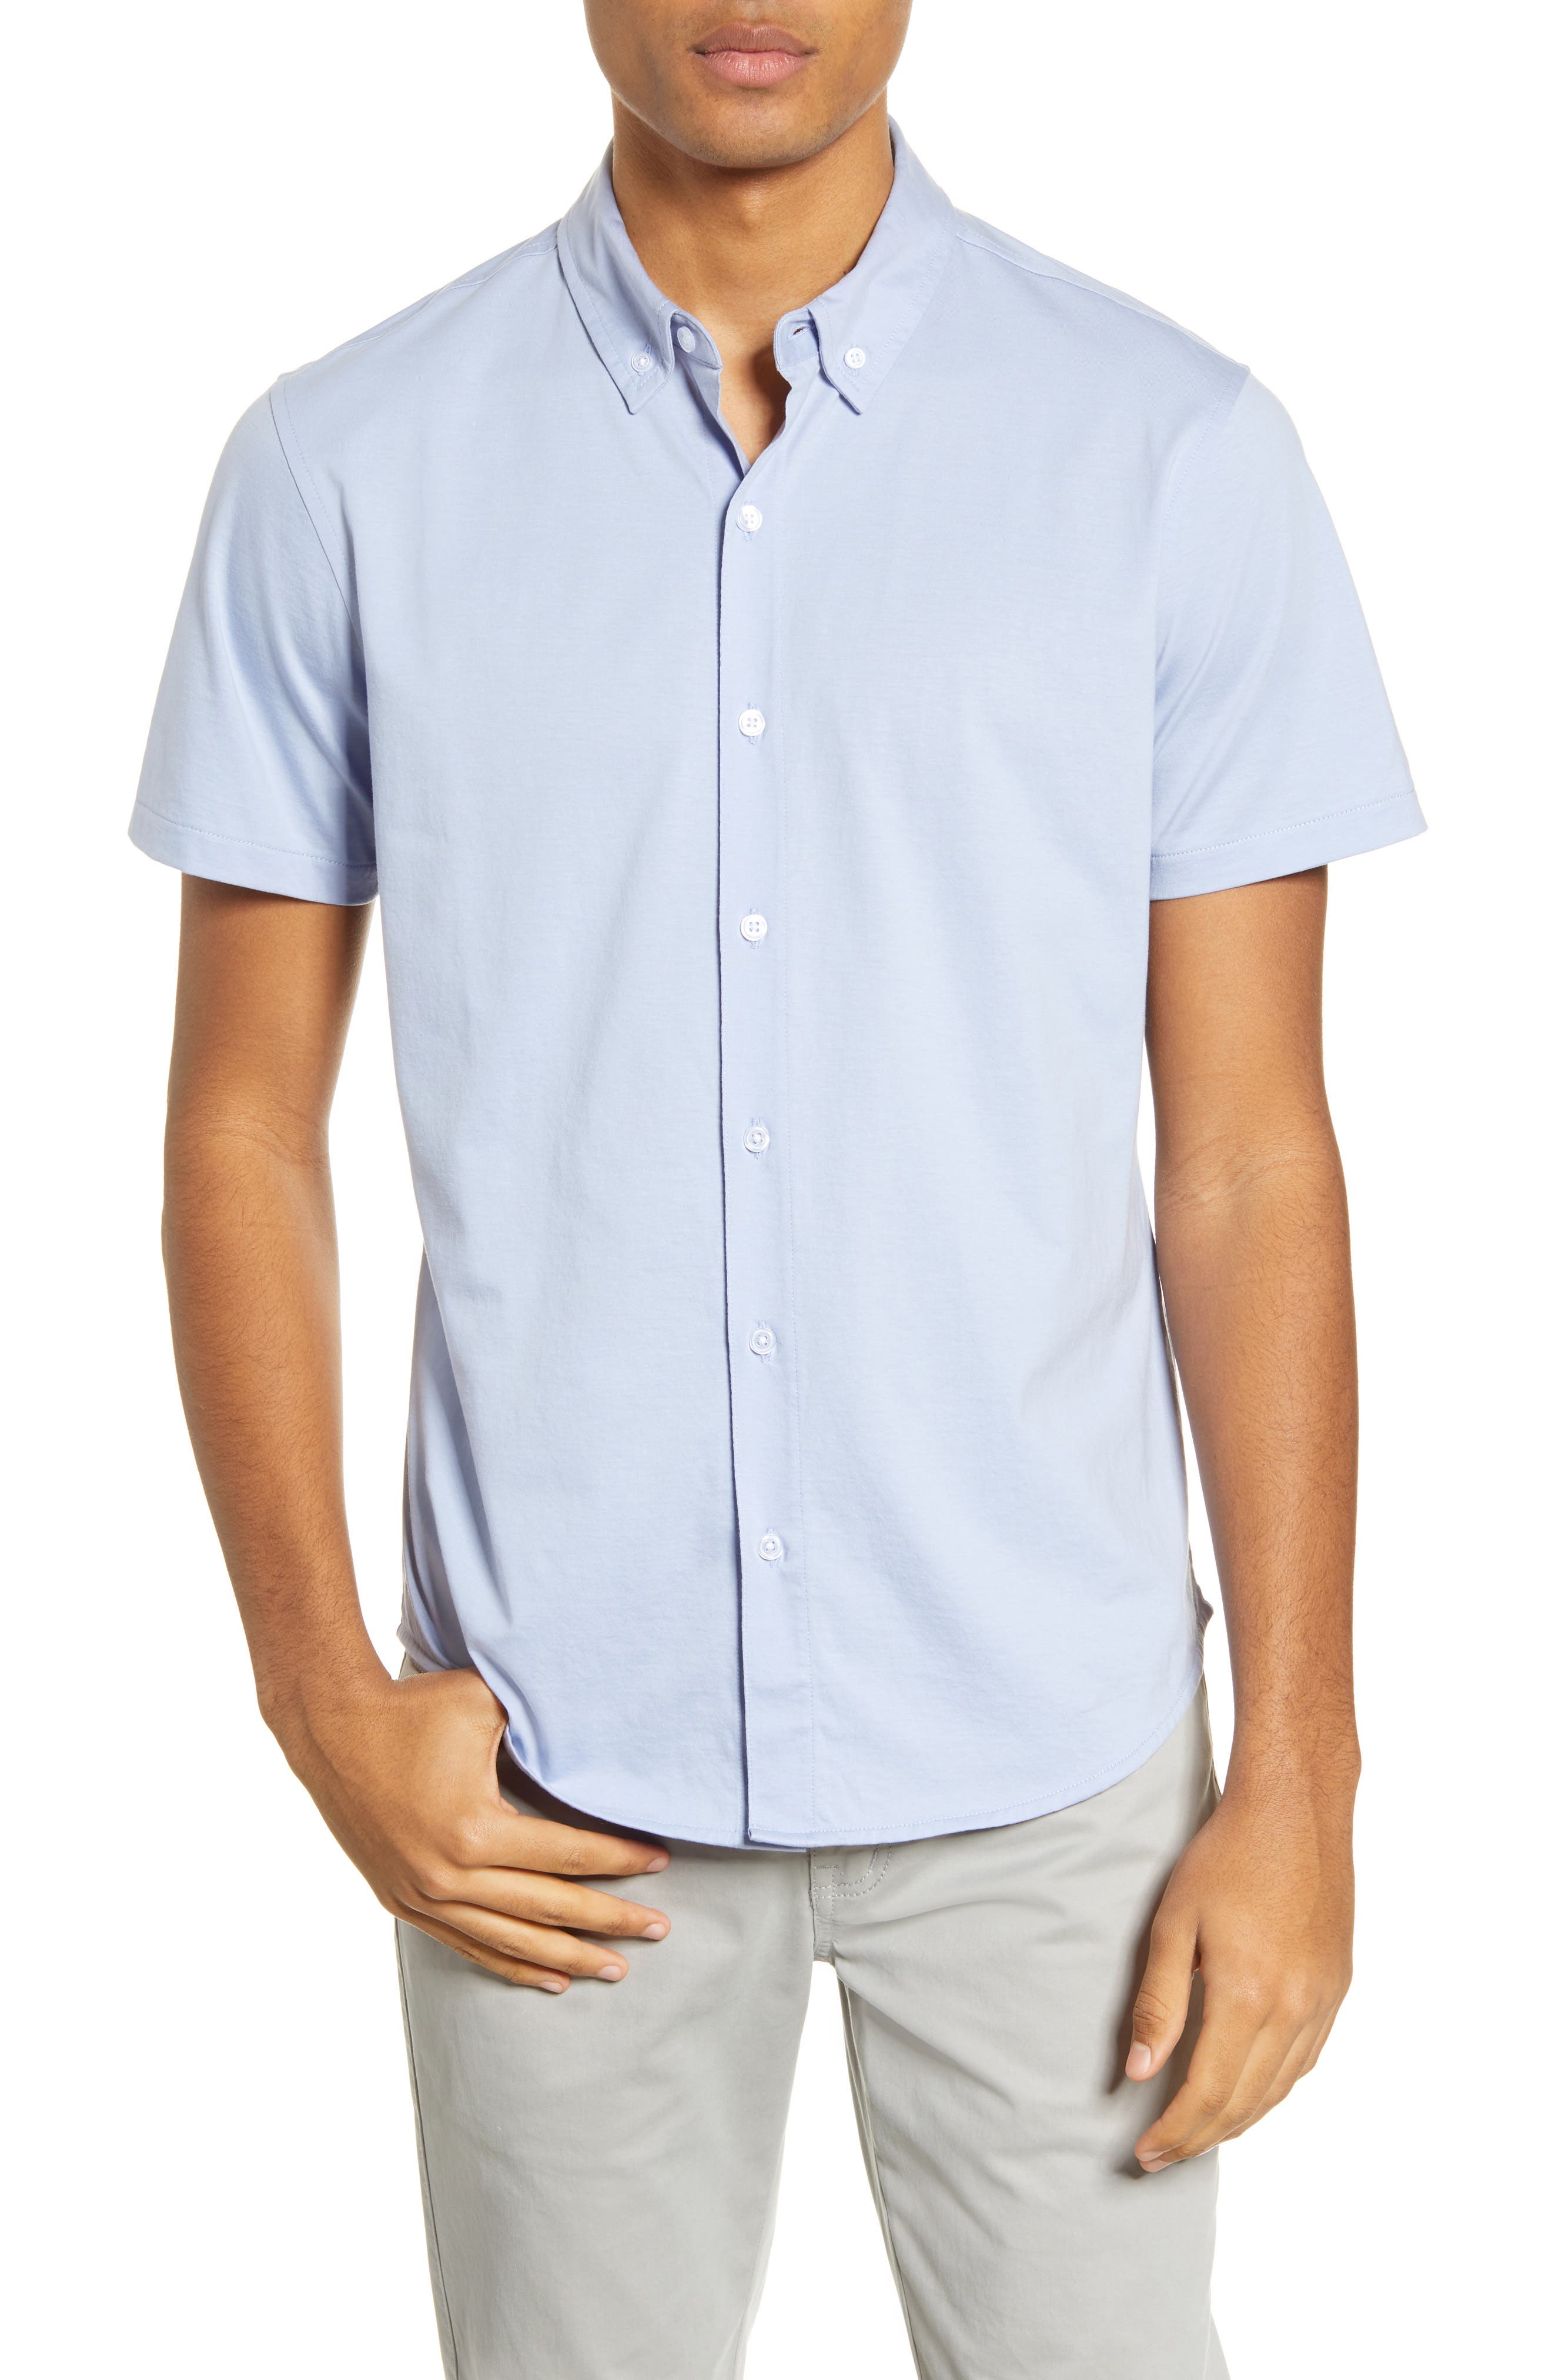 Bonobos Short Sleeve Button Down Clearance Sale, UP TO 60% OFF 